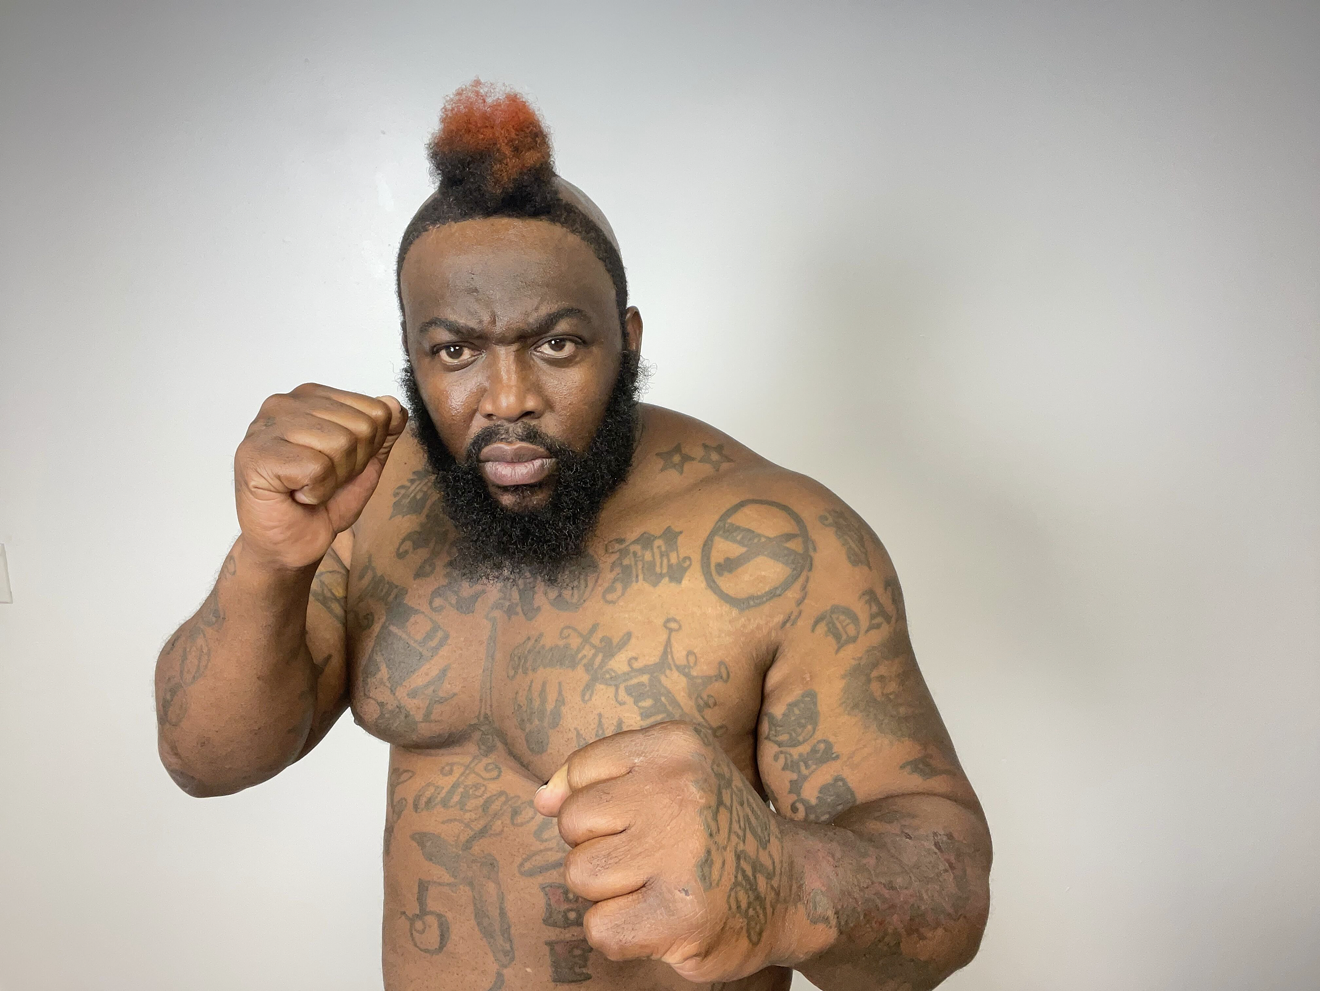 Dhafir Harris co-founded BYB Extreme bare-knuckle boxing in 2015.